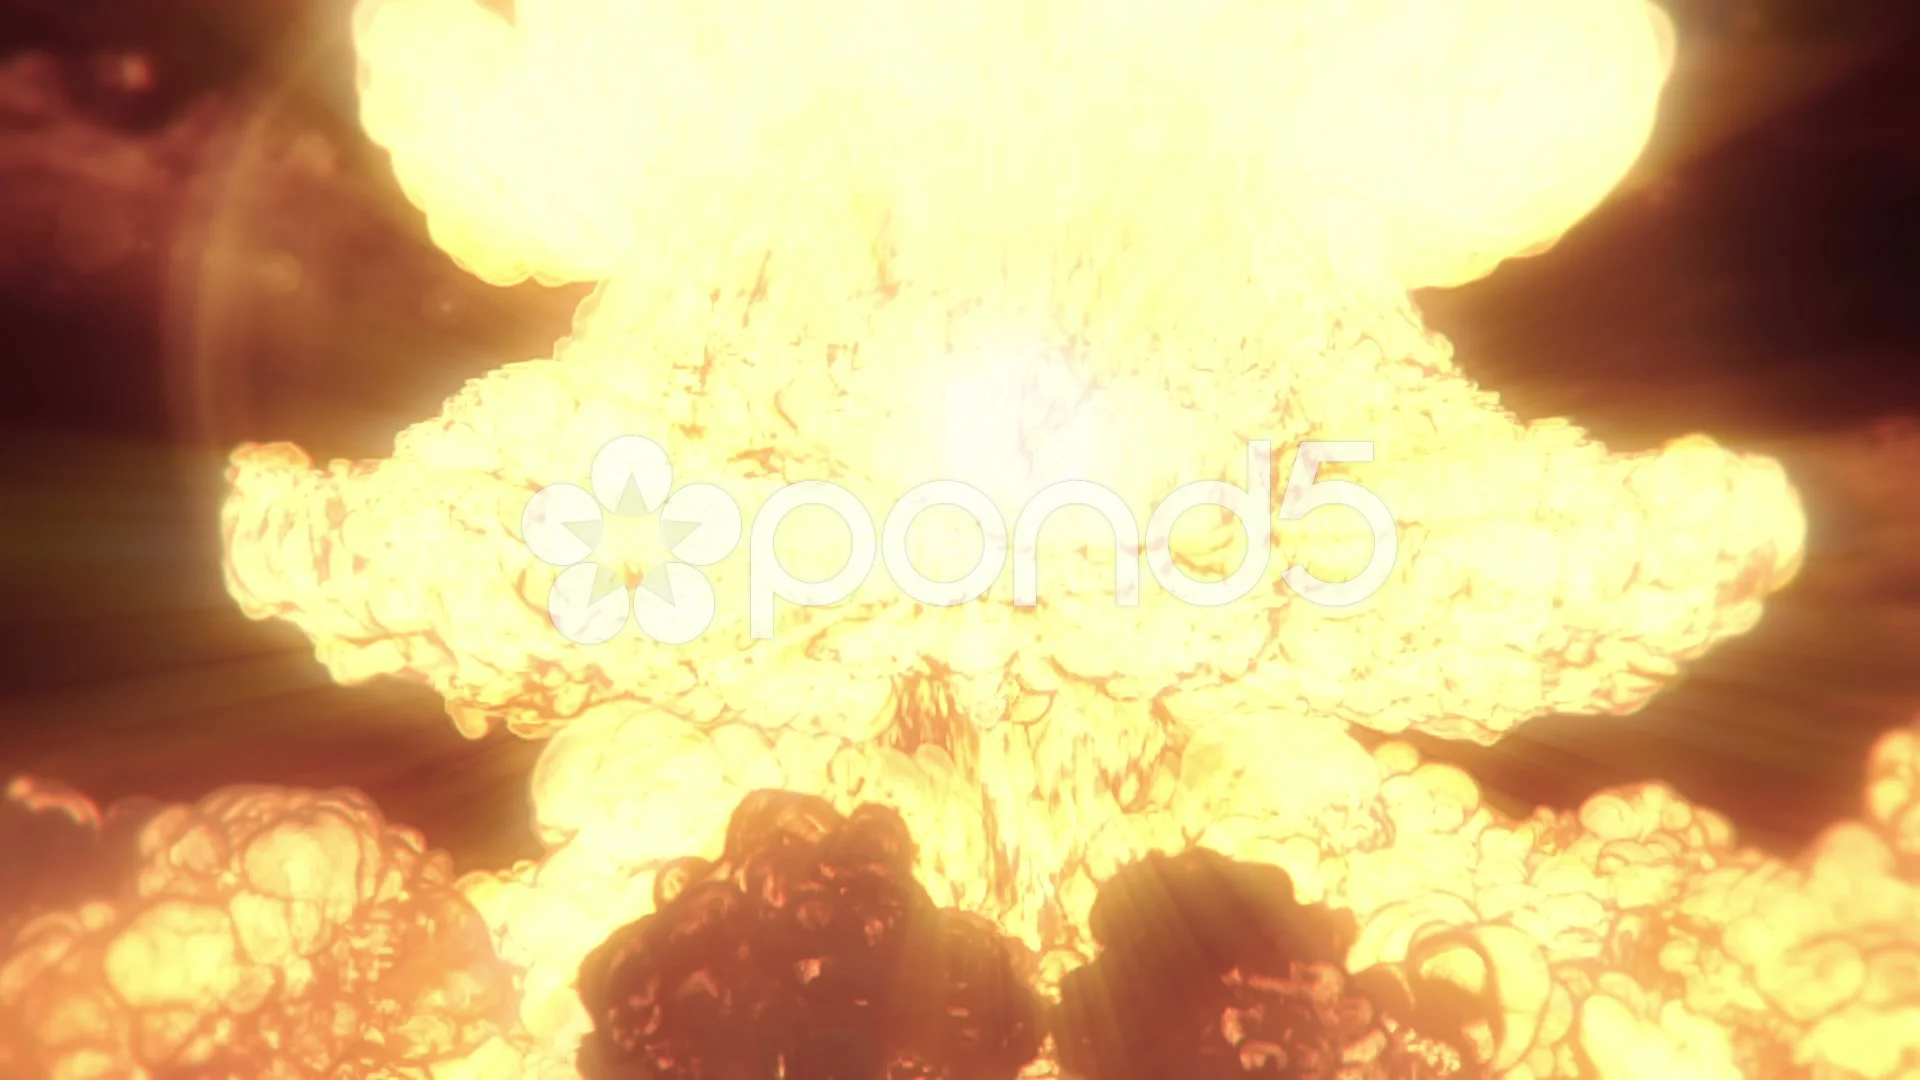 An Anime Artwork Of A Large Explosion Background Picture Of A Bomb  Exploding Background Image And Wallpaper for Free Download